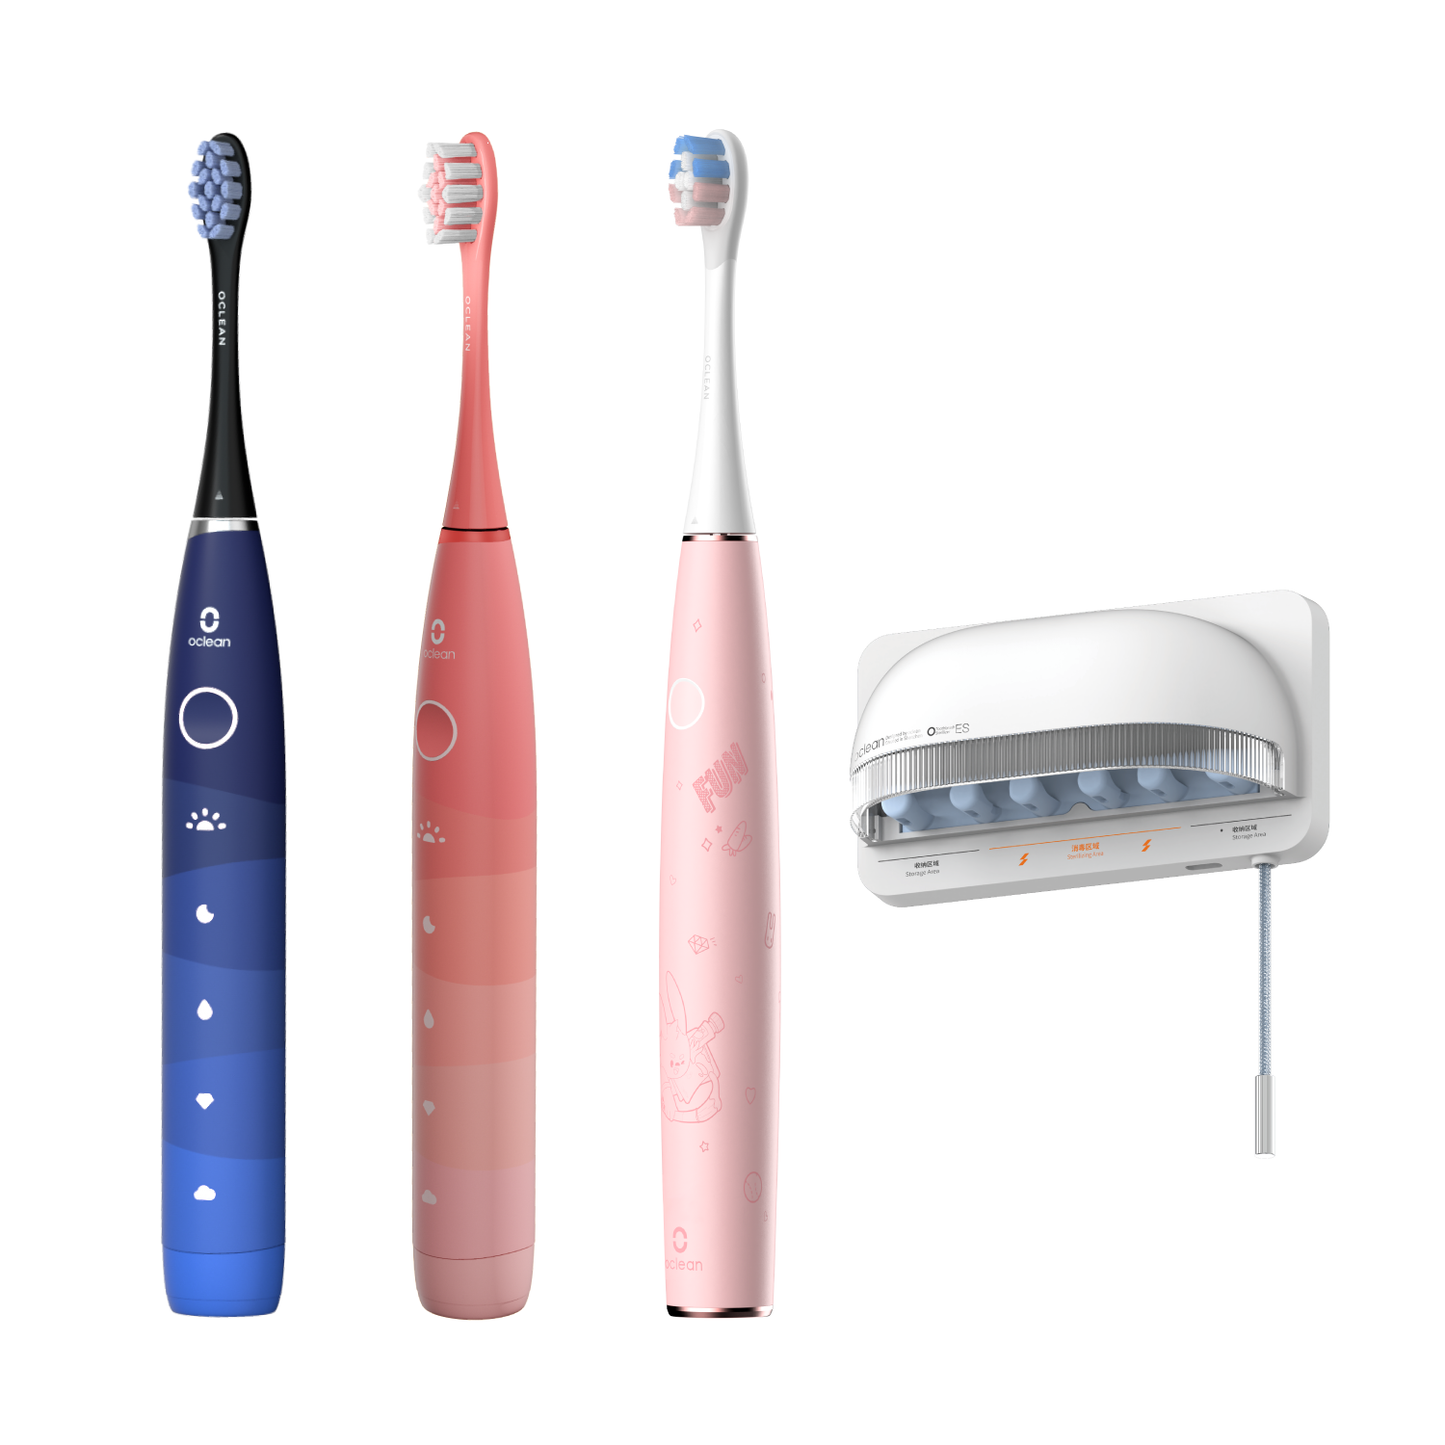 Family Essentials Set 1-Toothbrushes-Oclean Global Store